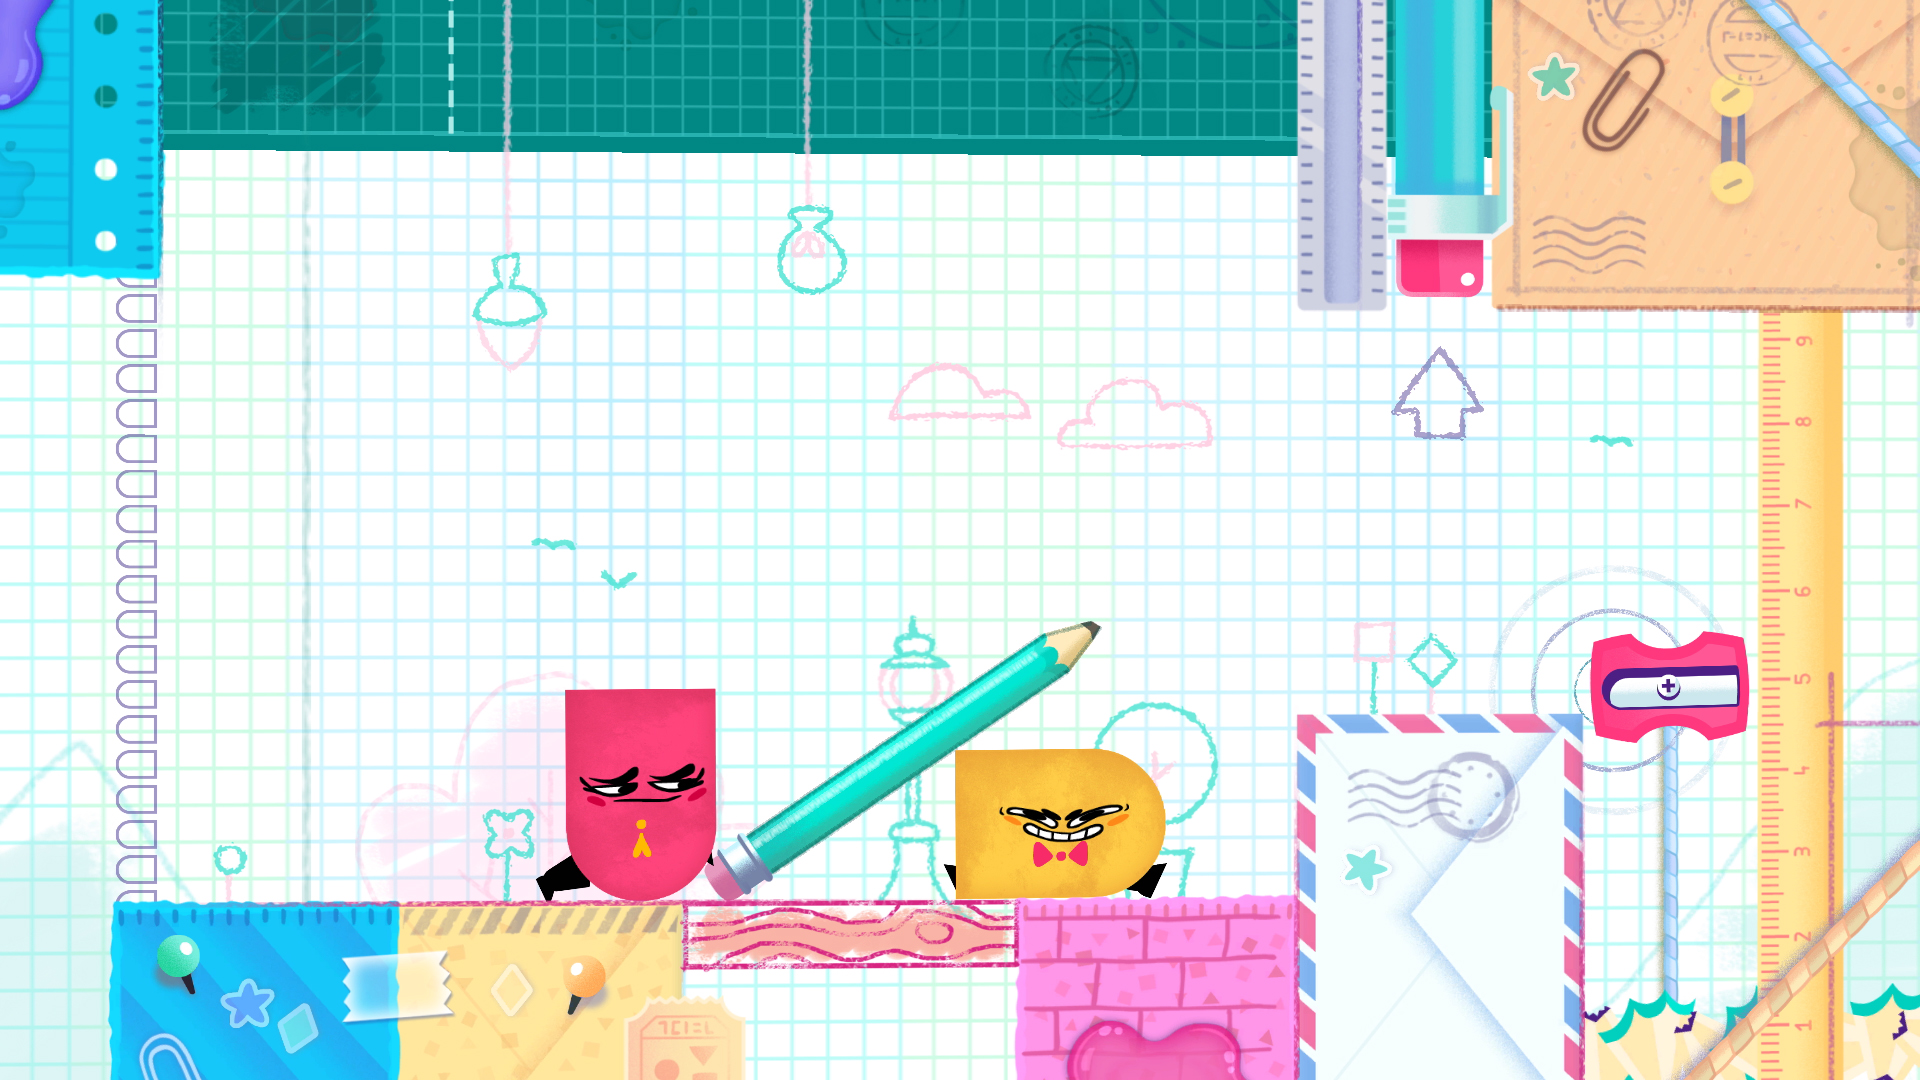 Snipperclips: Cut it out, together! - Nintendo Switch - wide 5